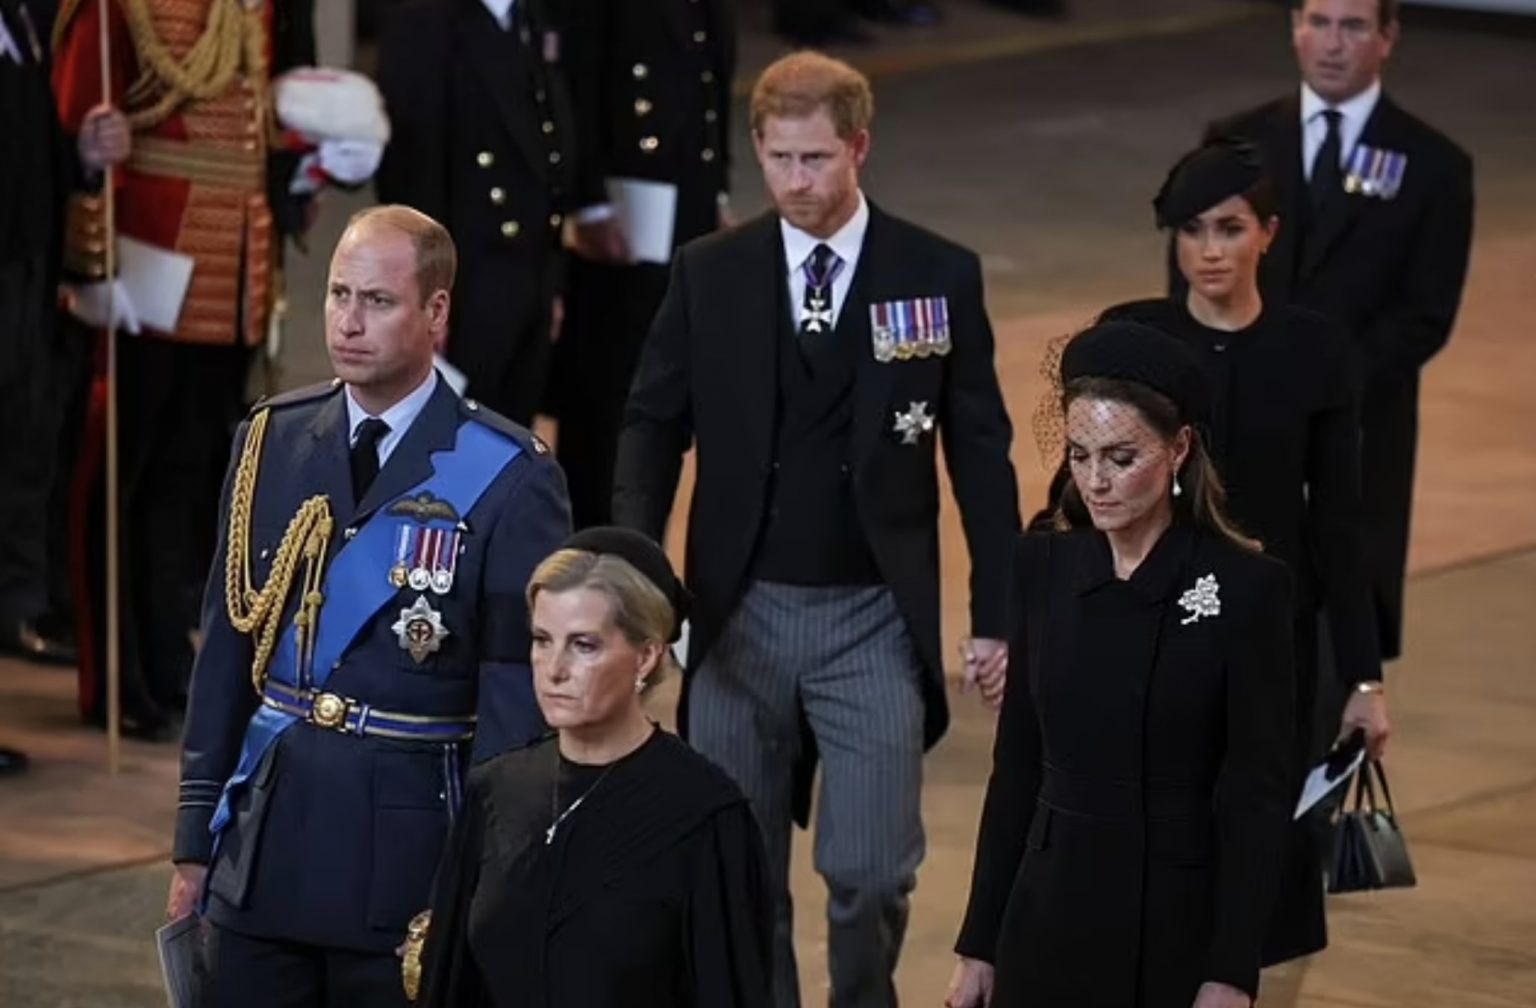 Harry And Meghan Are "Uninvited To State Reception At Buckingham Palace